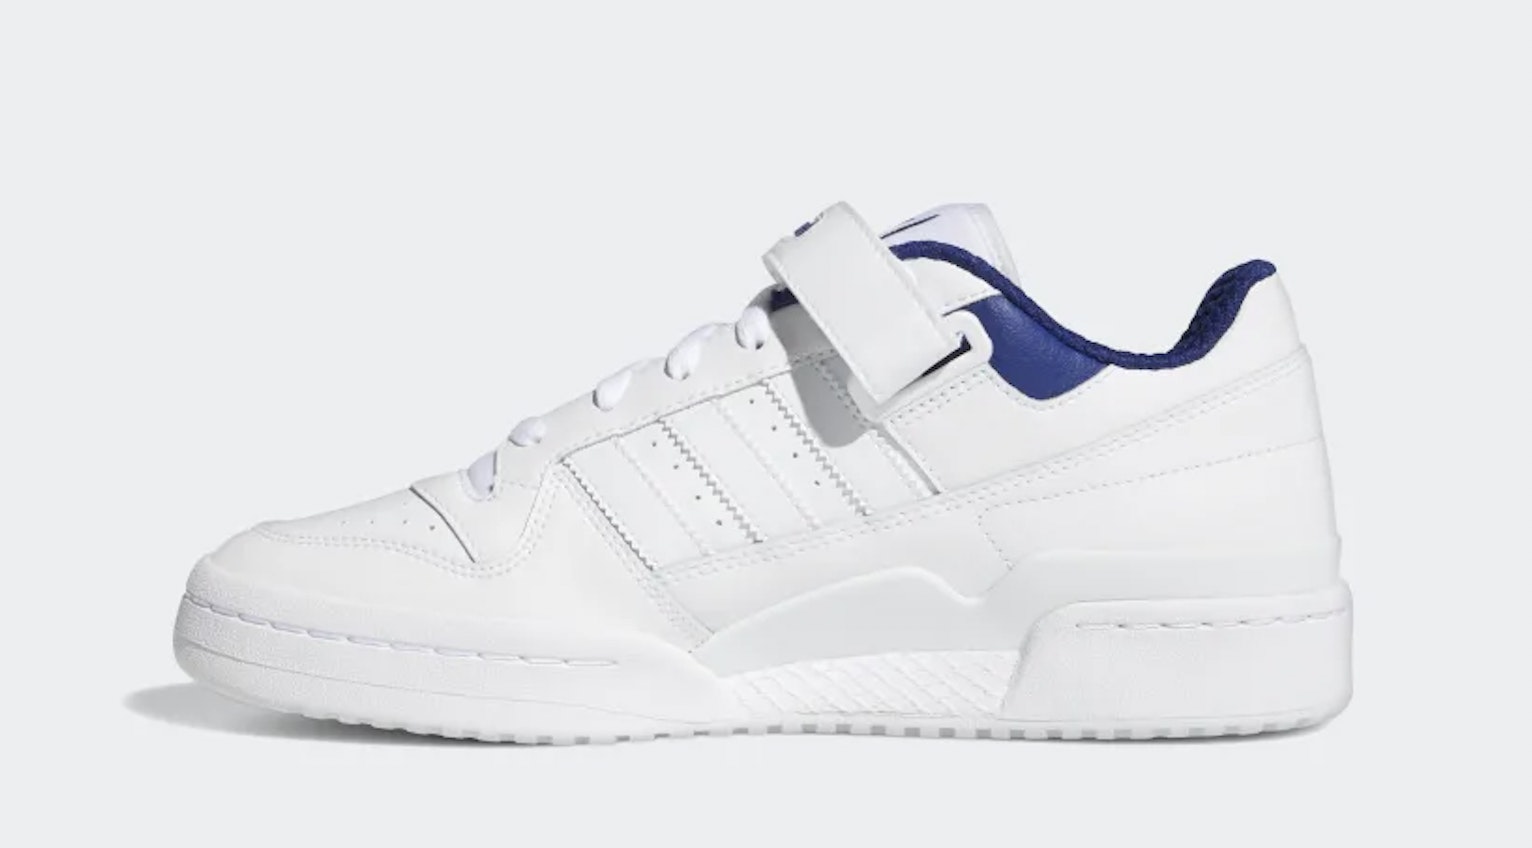 adidas Forum Low "Cloud White-Victory Blue"